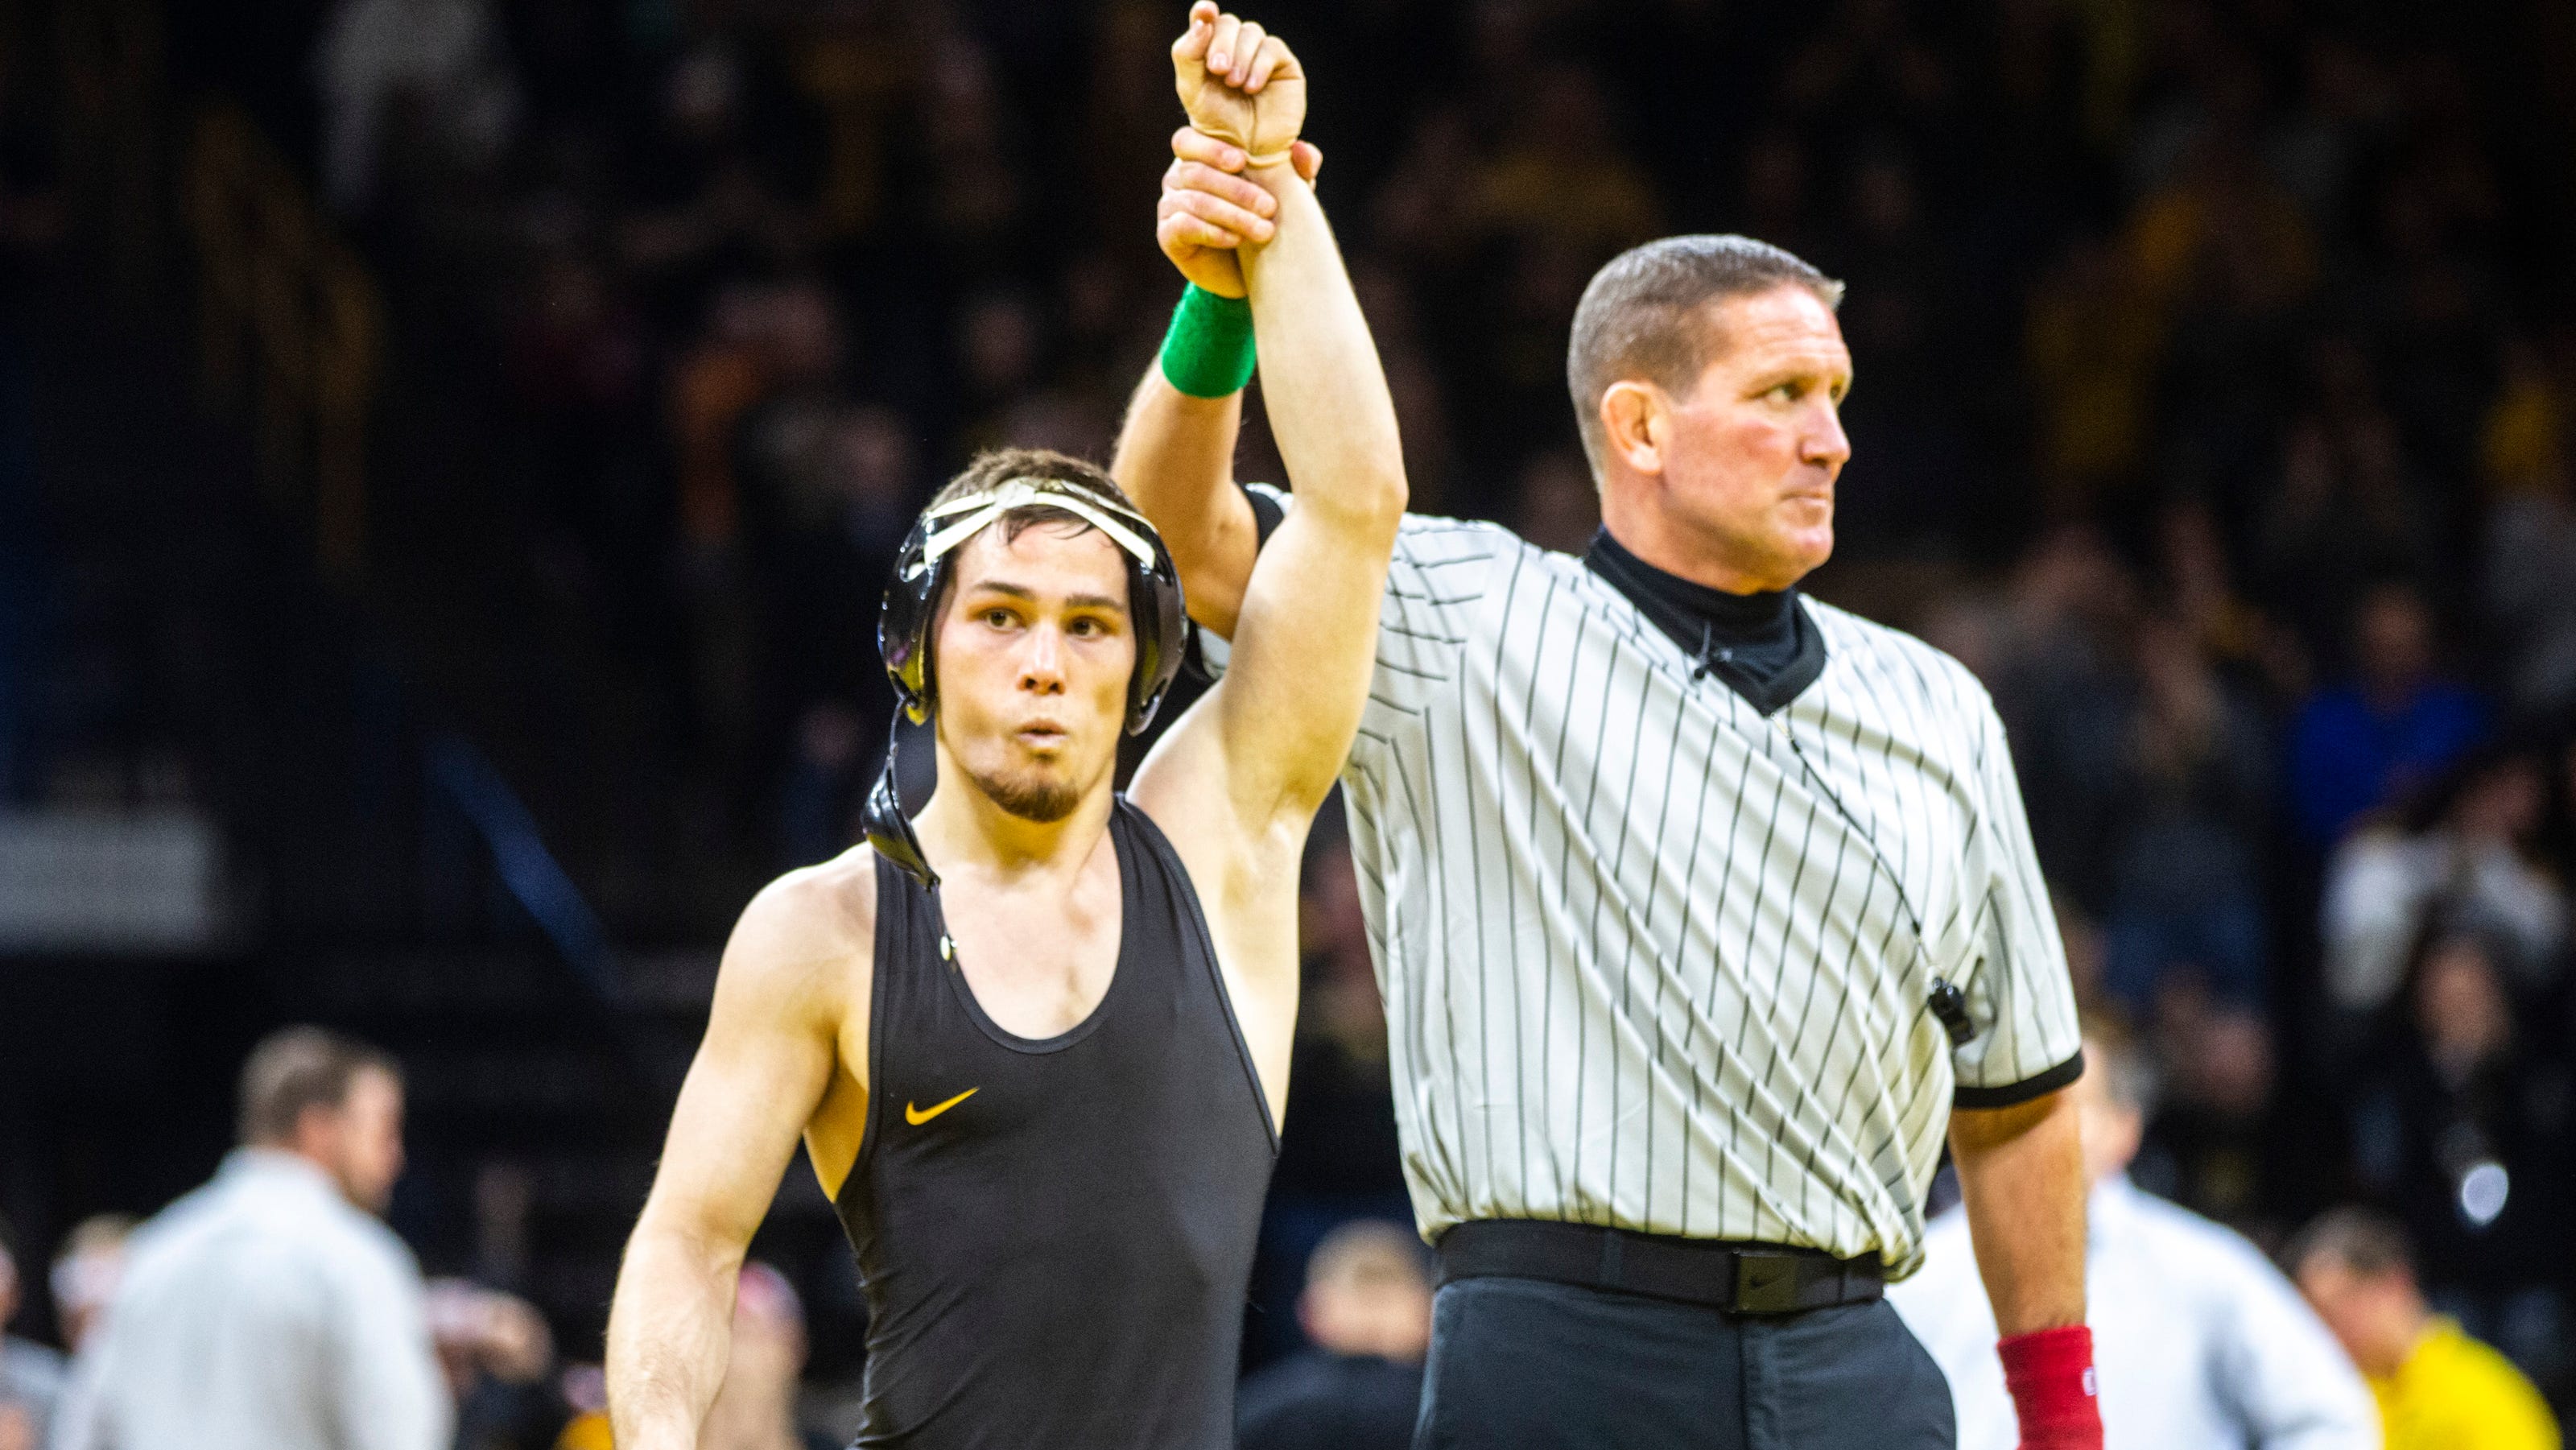 Iowa's Spencer Lee has outscored his last five opponents 84-1